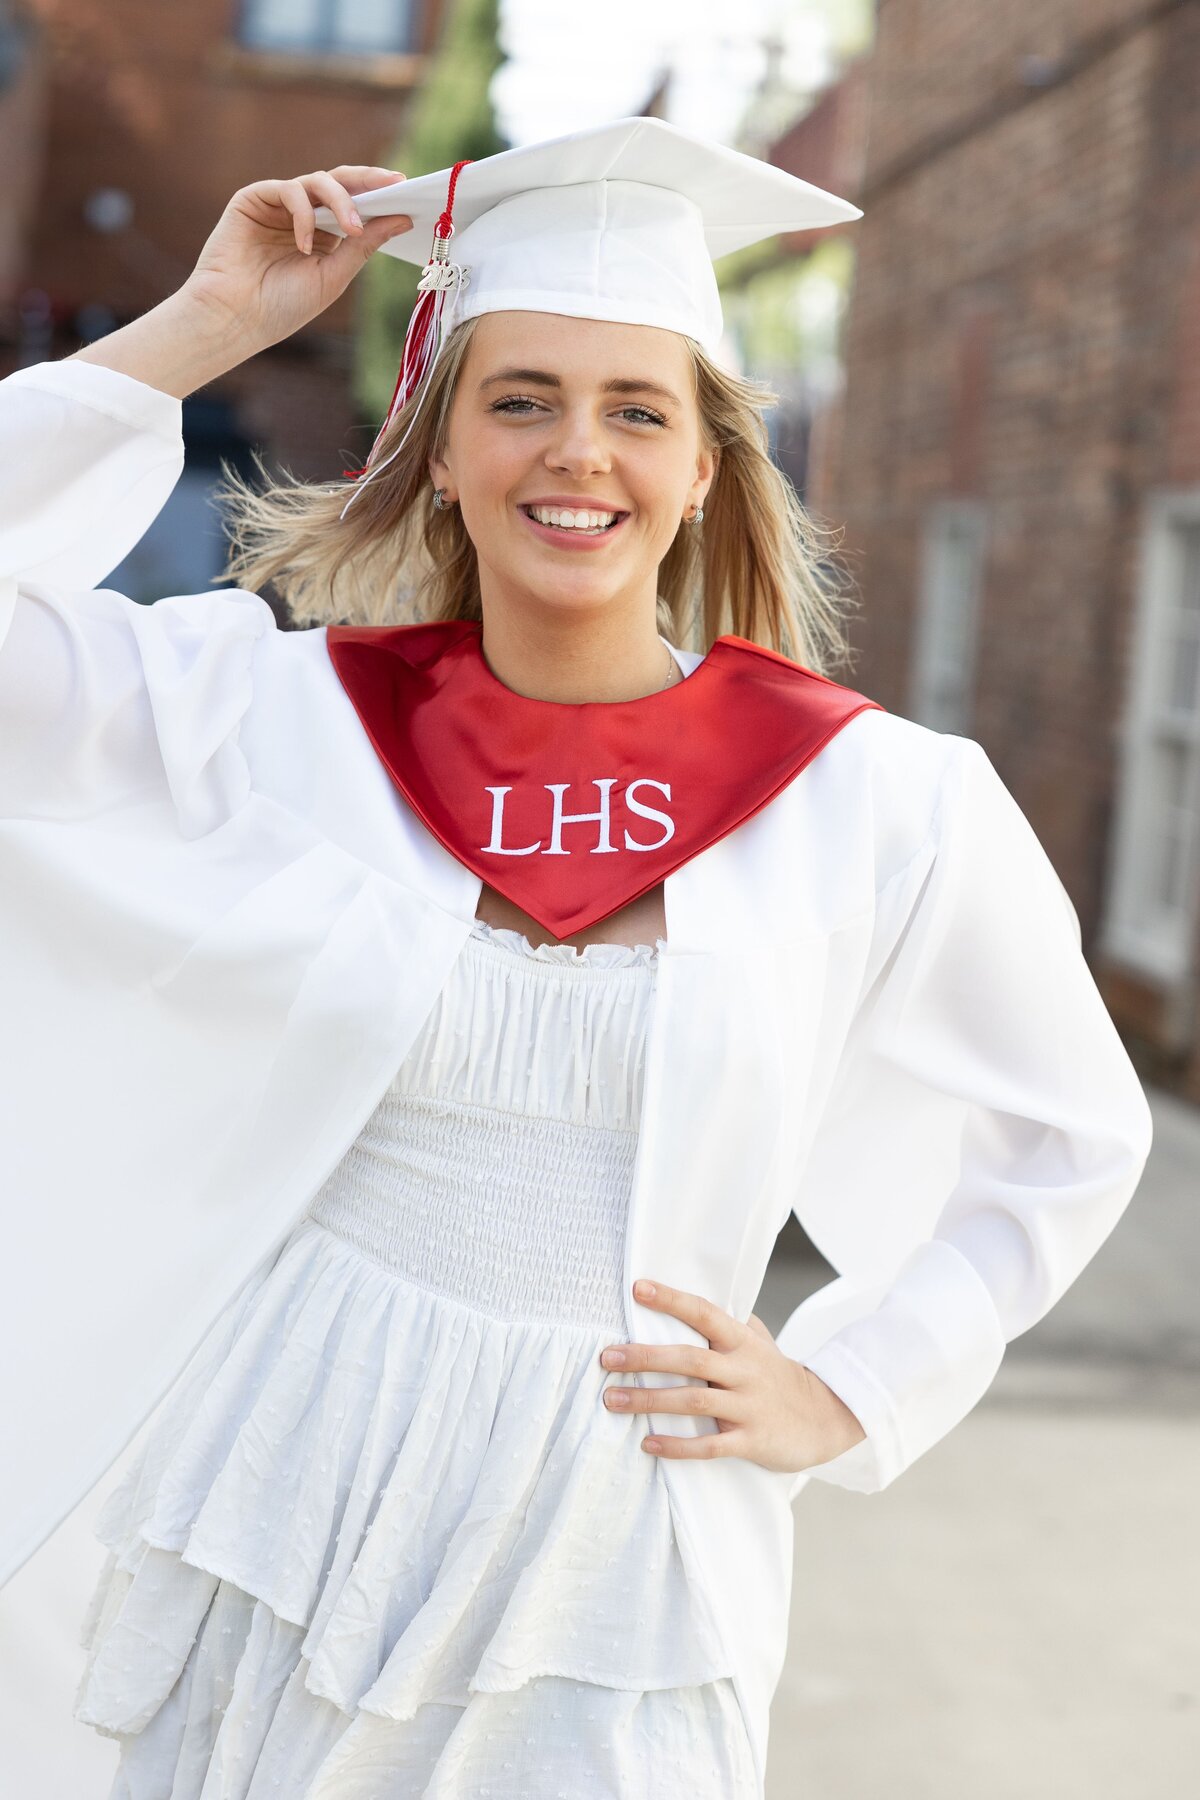 Loganville High School senior girl in cap and gown